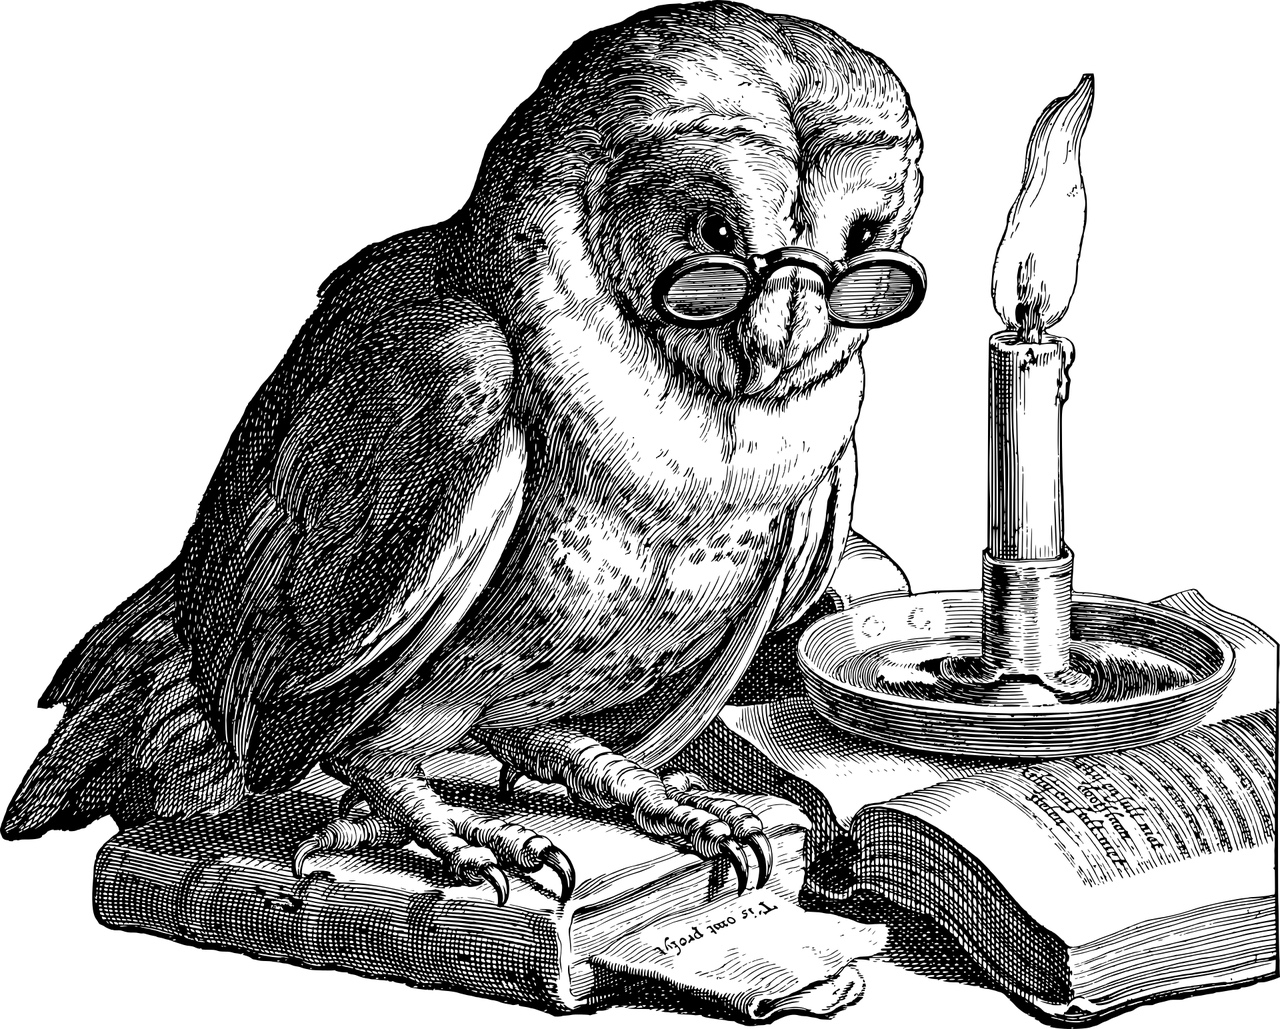 Illustration of an owl doing research